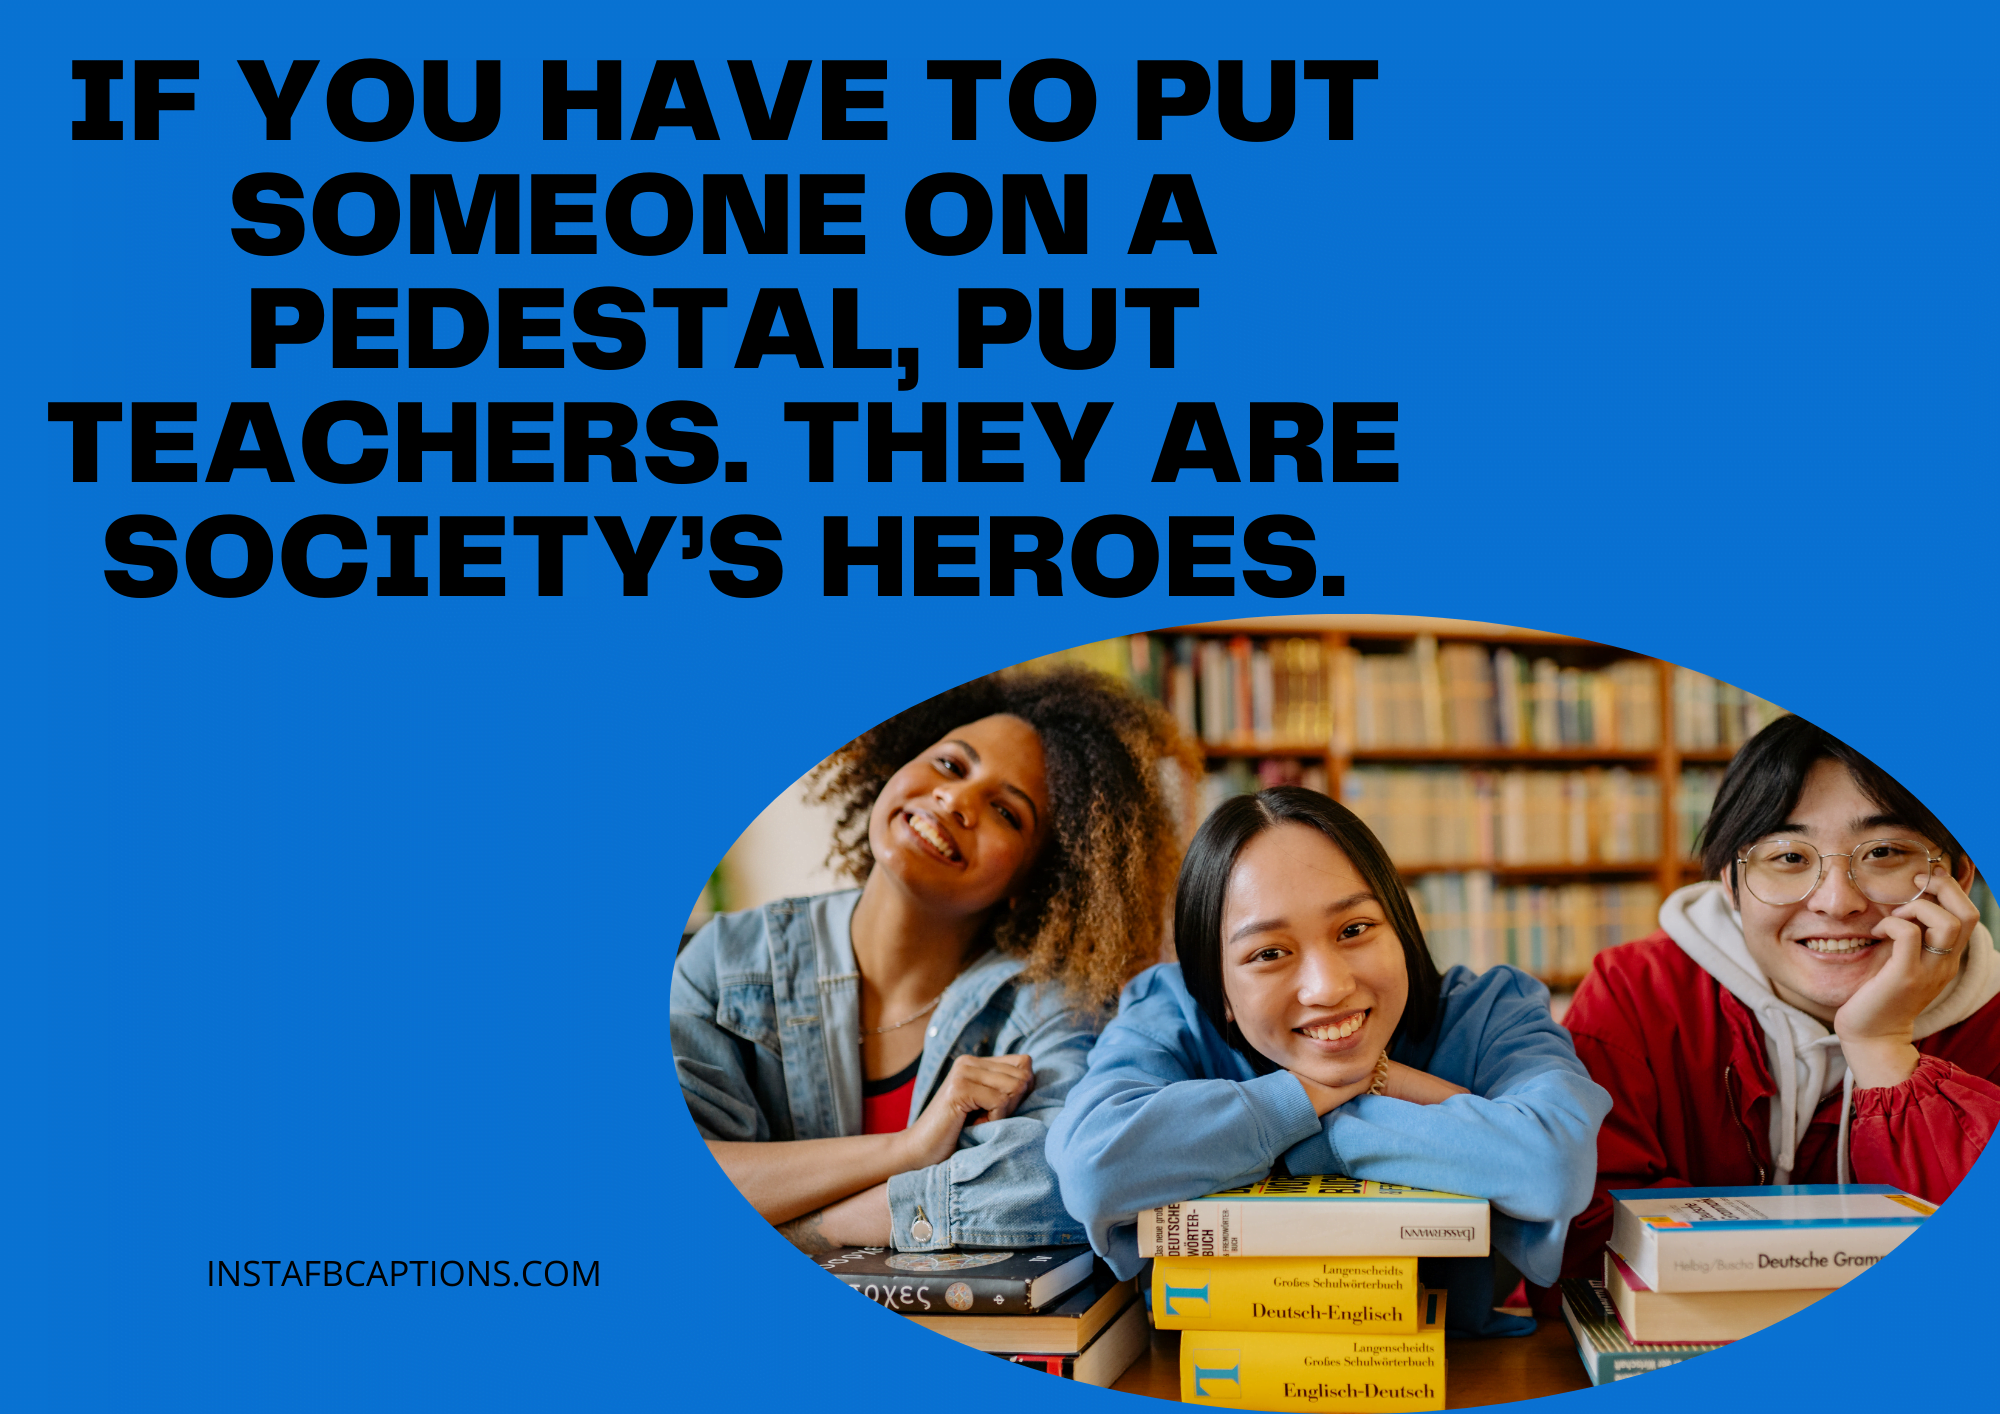 If you have to put someone on a pedestal, put teachers. They are society’s heroes. last day of college captions for instagram - Captions for Instagram Showing that You are Missing your Professors - [New] Captions for Last Day of College Instagram Posts in 2023